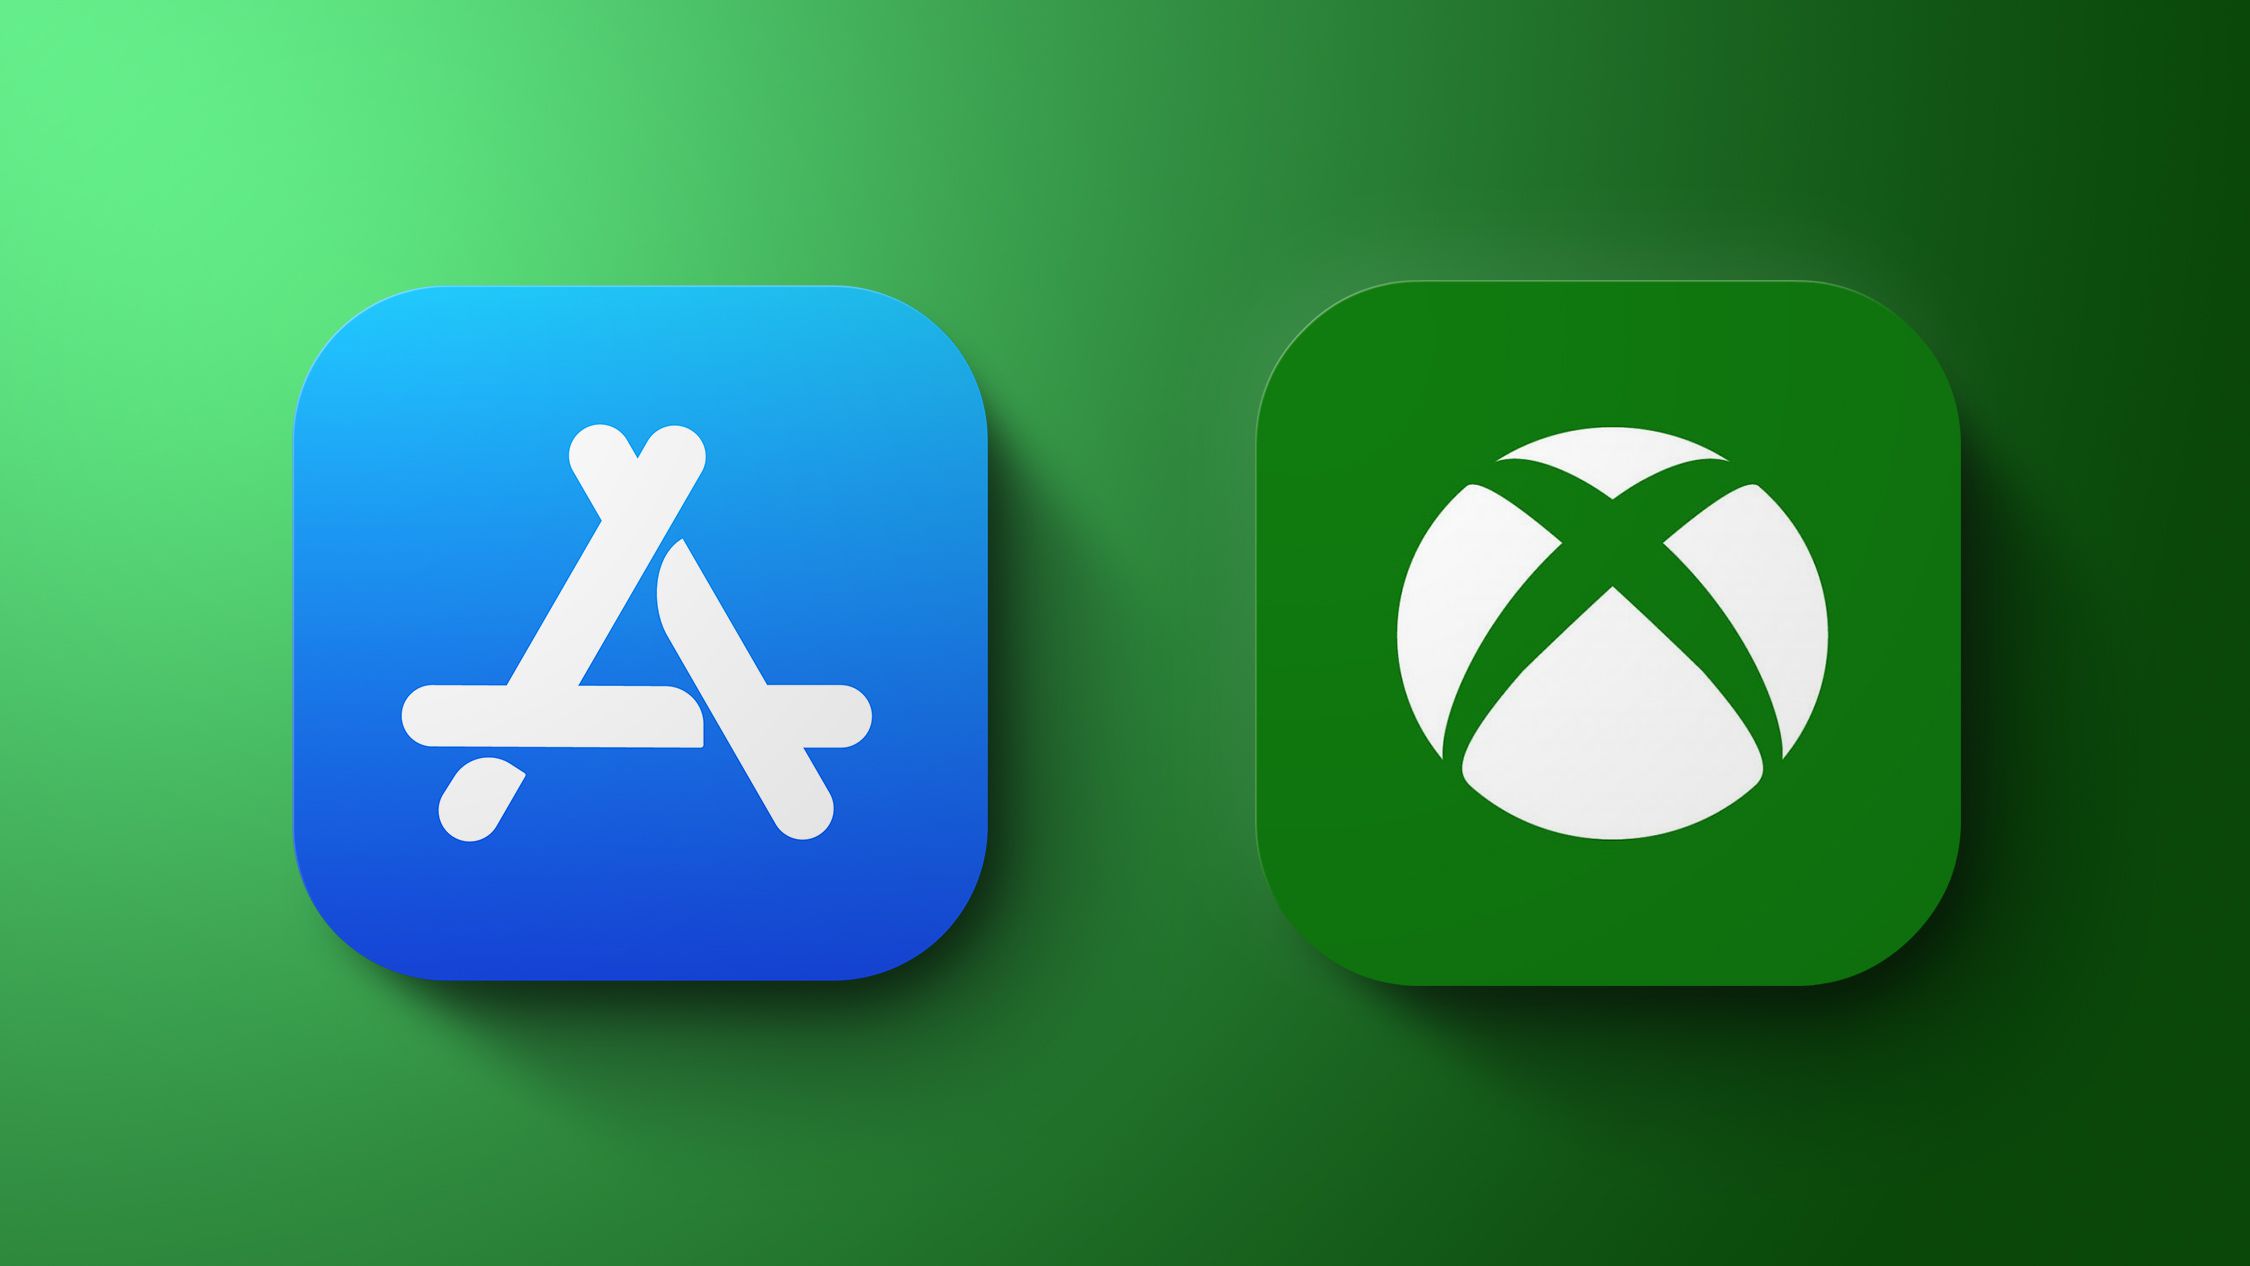 App Store and XCloud